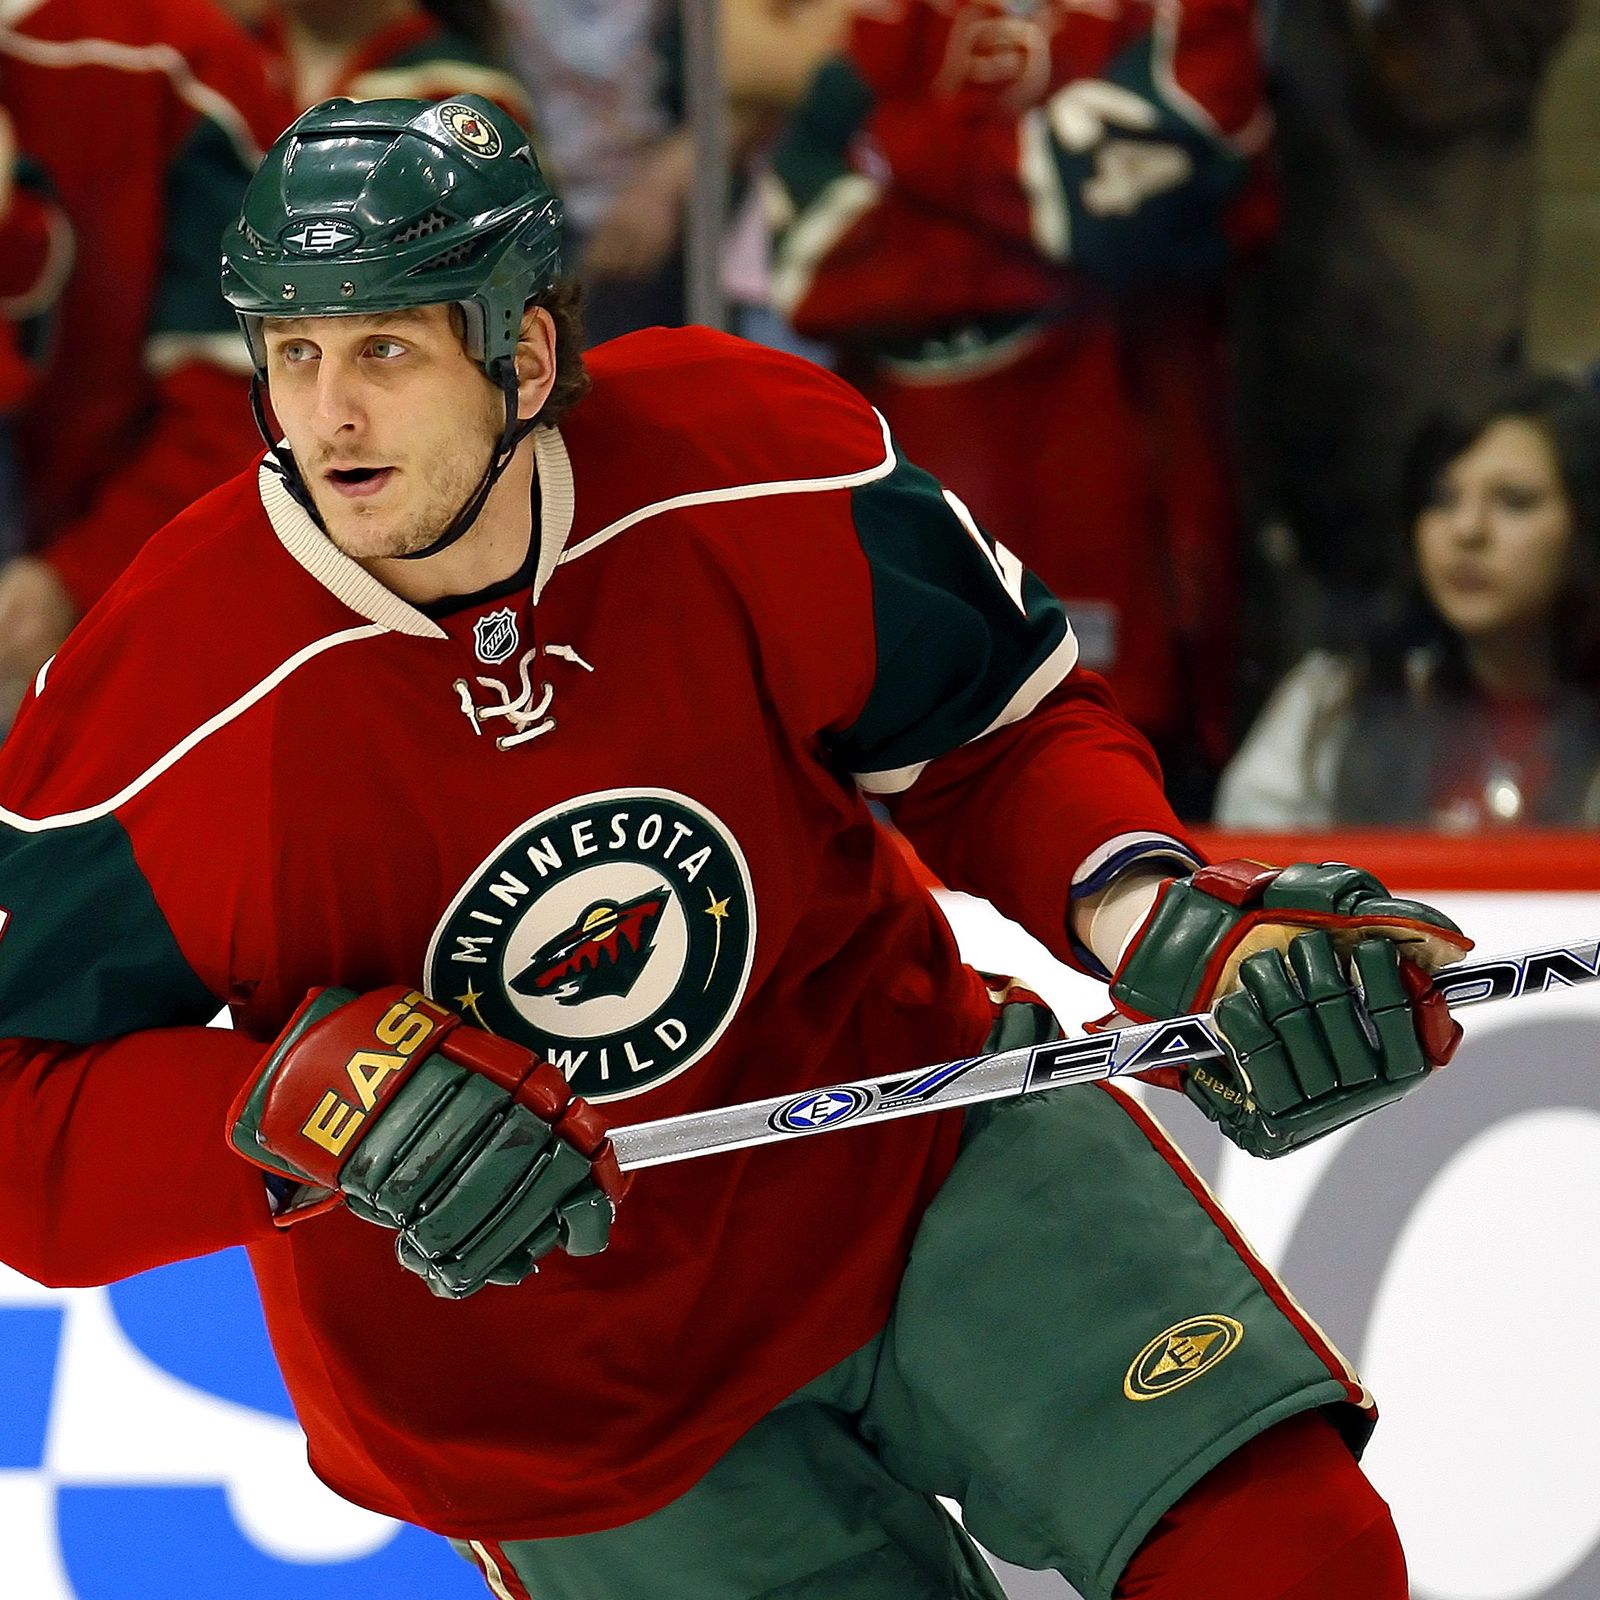 Boogaard brother charged in NHL player's OD death